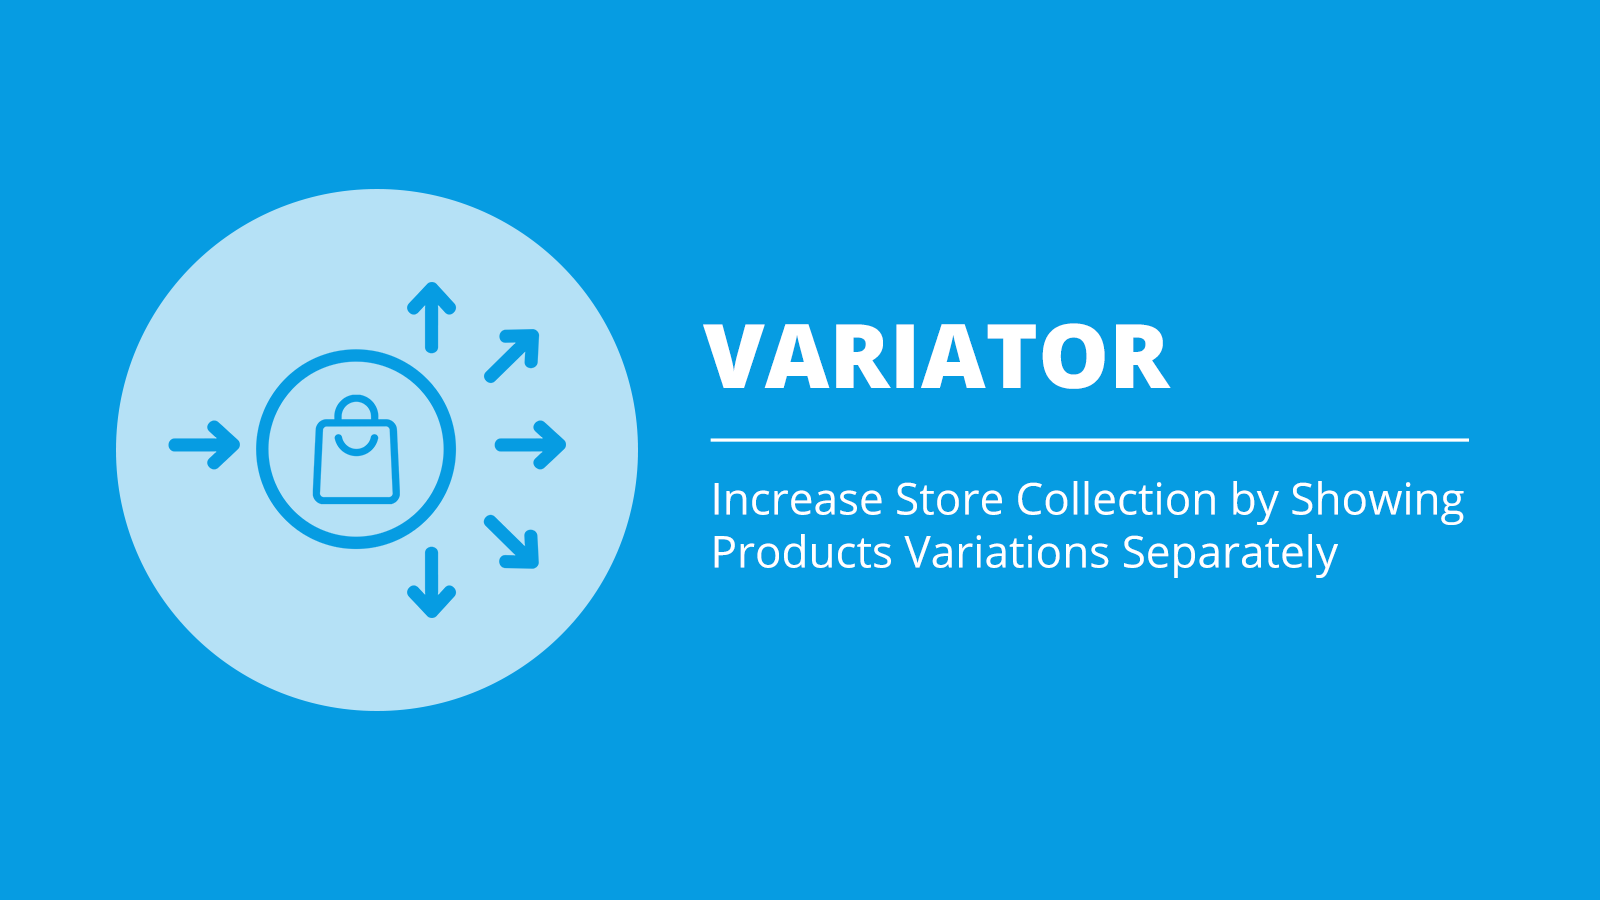 Variator App show variants as a seprate product